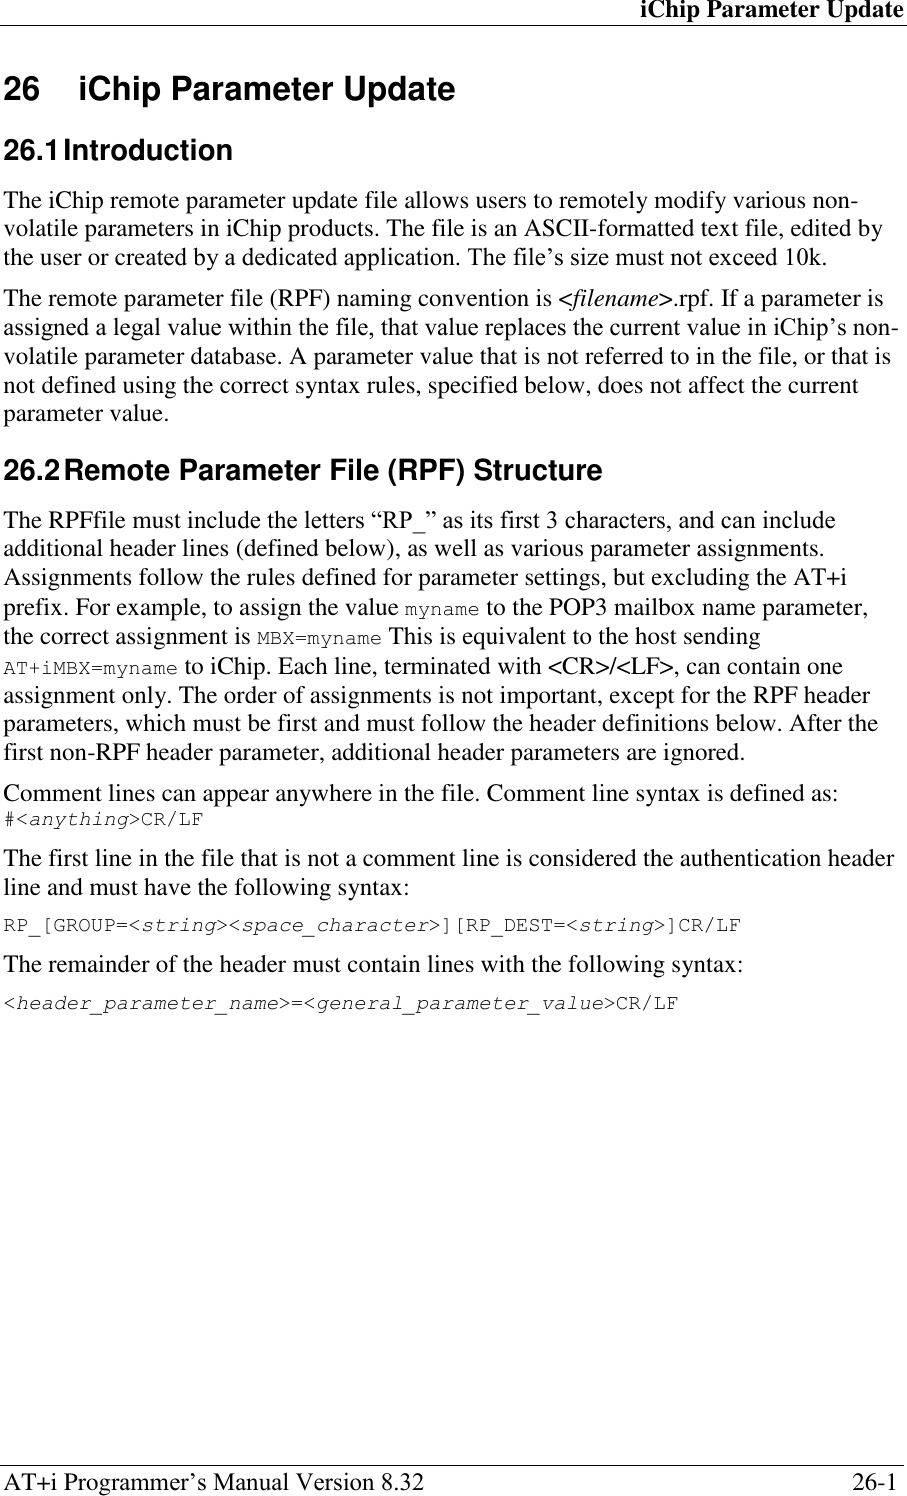 iChip Parameter Update AT+i Programmer‘s Manual Version 8.32  26-1 26  iChip Parameter Update  26.1 Introduction The iChip remote parameter update file allows users to remotely modify various non-volatile parameters in iChip products. The file is an ASCII-formatted text file, edited by the user or created by a dedicated application. The file‘s size must not exceed 10k. The remote parameter file (RPF) naming convention is &lt;filename&gt;.rpf. If a parameter is assigned a legal value within the file, that value replaces the current value in iChip‘s non-volatile parameter database. A parameter value that is not referred to in the file, or that is not defined using the correct syntax rules, specified below, does not affect the current parameter value. 26.2 Remote Parameter File (RPF) Structure  The RPFfile must include the letters ―RP_‖ as its first 3 characters, and can include additional header lines (defined below), as well as various parameter assignments. Assignments follow the rules defined for parameter settings, but excluding the AT+i prefix. For example, to assign the value myname to the POP3 mailbox name parameter, the correct assignment is MBX=myname This is equivalent to the host sending AT+iMBX=myname to iChip. Each line, terminated with &lt;CR&gt;/&lt;LF&gt;, can contain one assignment only. The order of assignments is not important, except for the RPF header parameters, which must be first and must follow the header definitions below. After the first non-RPF header parameter, additional header parameters are ignored. Comment lines can appear anywhere in the file. Comment line syntax is defined as: #&lt;anything&gt;CR/LF The first line in the file that is not a comment line is considered the authentication header line and must have the following syntax: RP_[GROUP=&lt;string&gt;&lt;space_character&gt;][RP_DEST=&lt;string&gt;]CR/LF The remainder of the header must contain lines with the following syntax: &lt;header_parameter_name&gt;=&lt;general_parameter_value&gt;CR/LF 